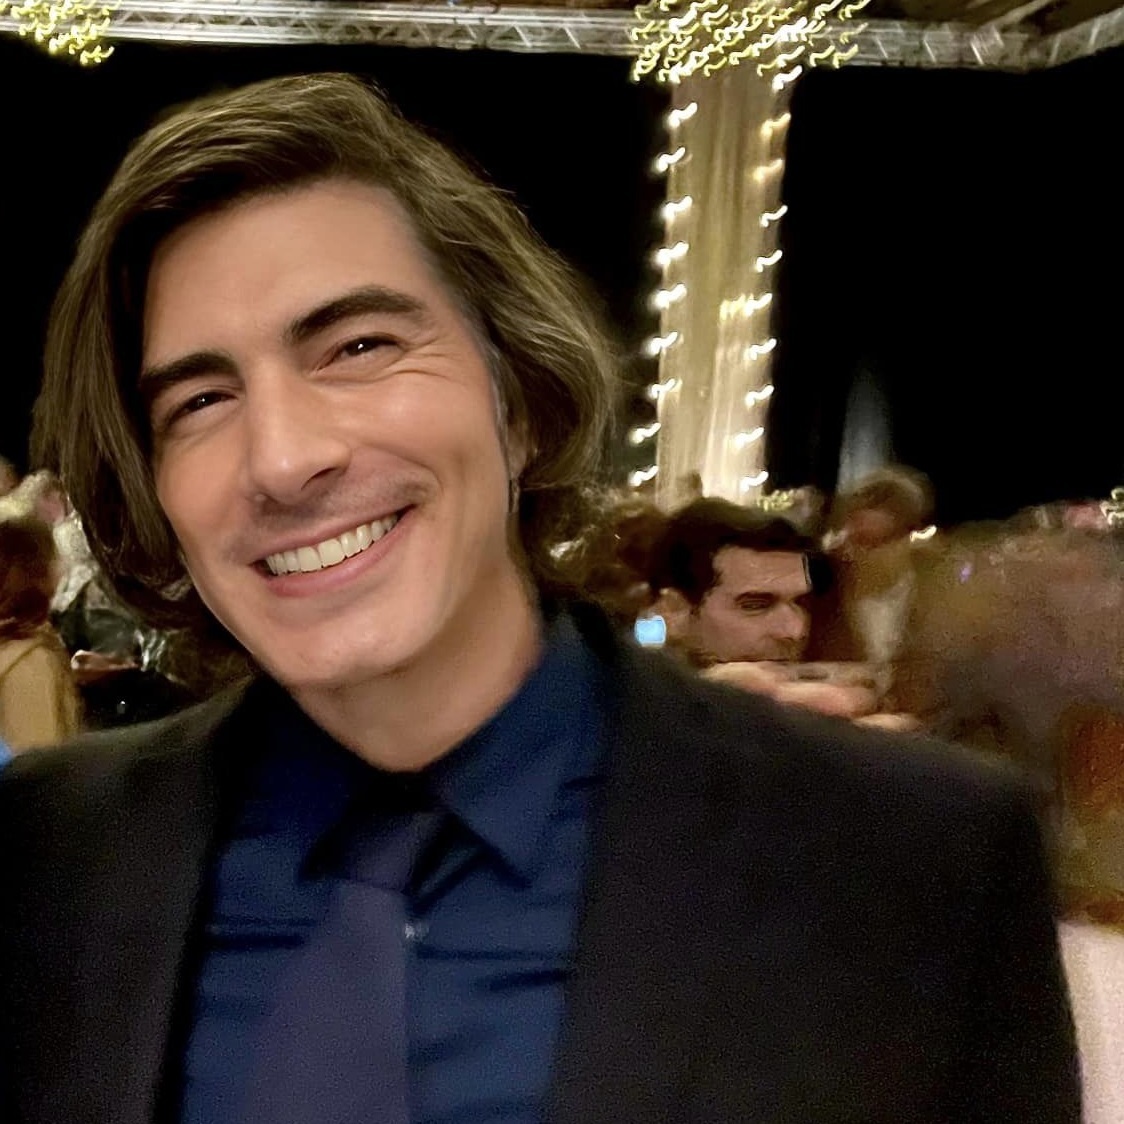 NEW photo of Brandon at the Julien Dubuque International Film Festival (JDIFF) Awards Night, which took place on Saturday evening! 😍🔥
📸 credit: Jeff Dyer
#brandonrouth #superman #legendsoftomorrow